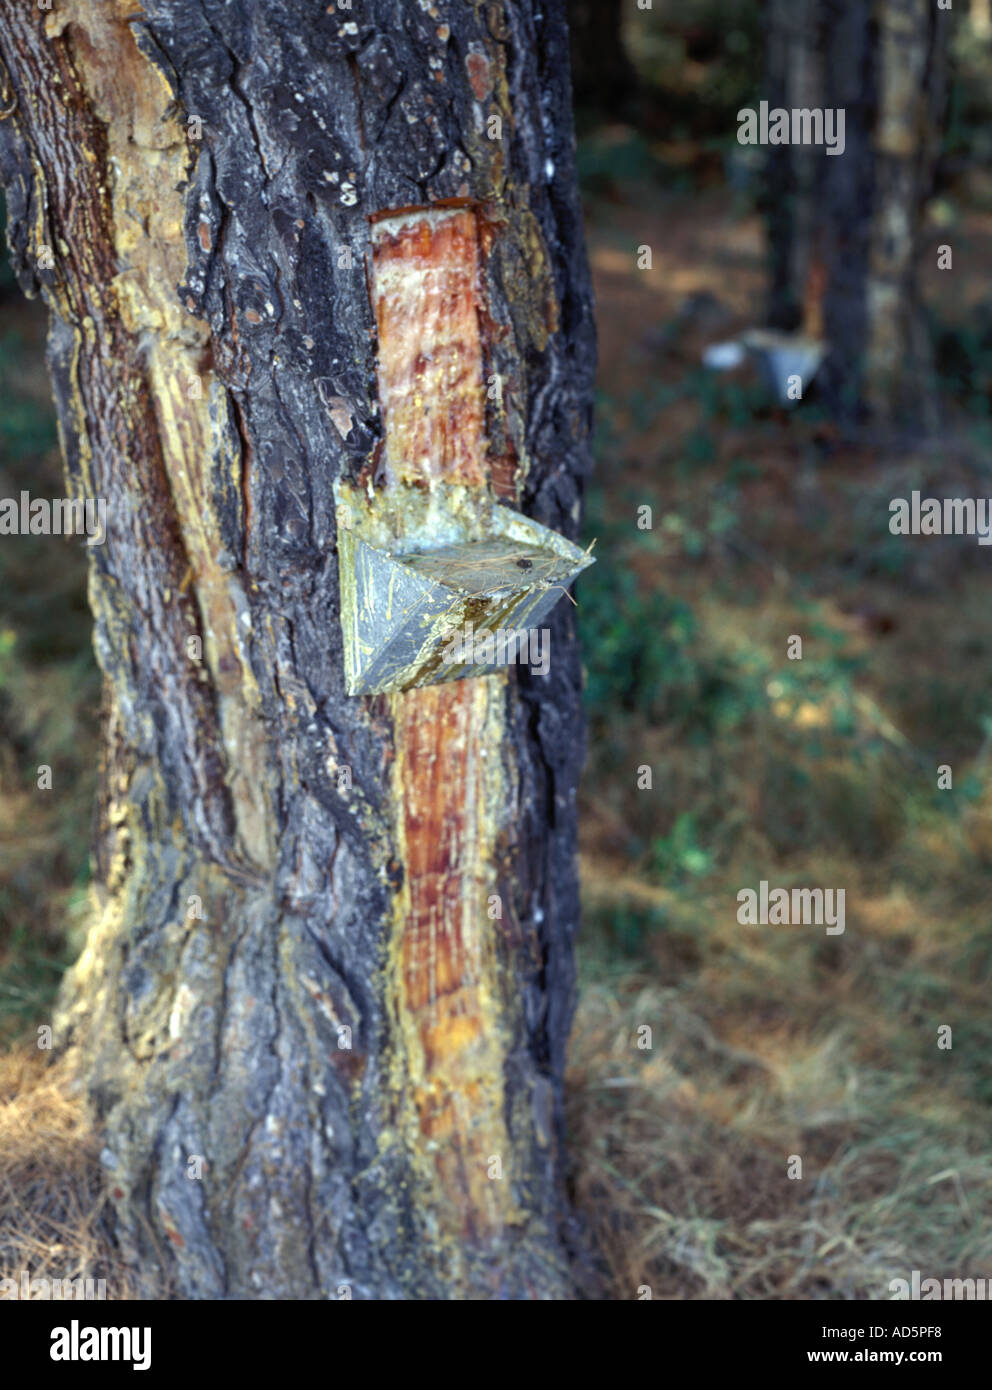 Tapping tree resin from a Pine tree in the making of Retsina on the Island of Skopelos Greece Stock Photo